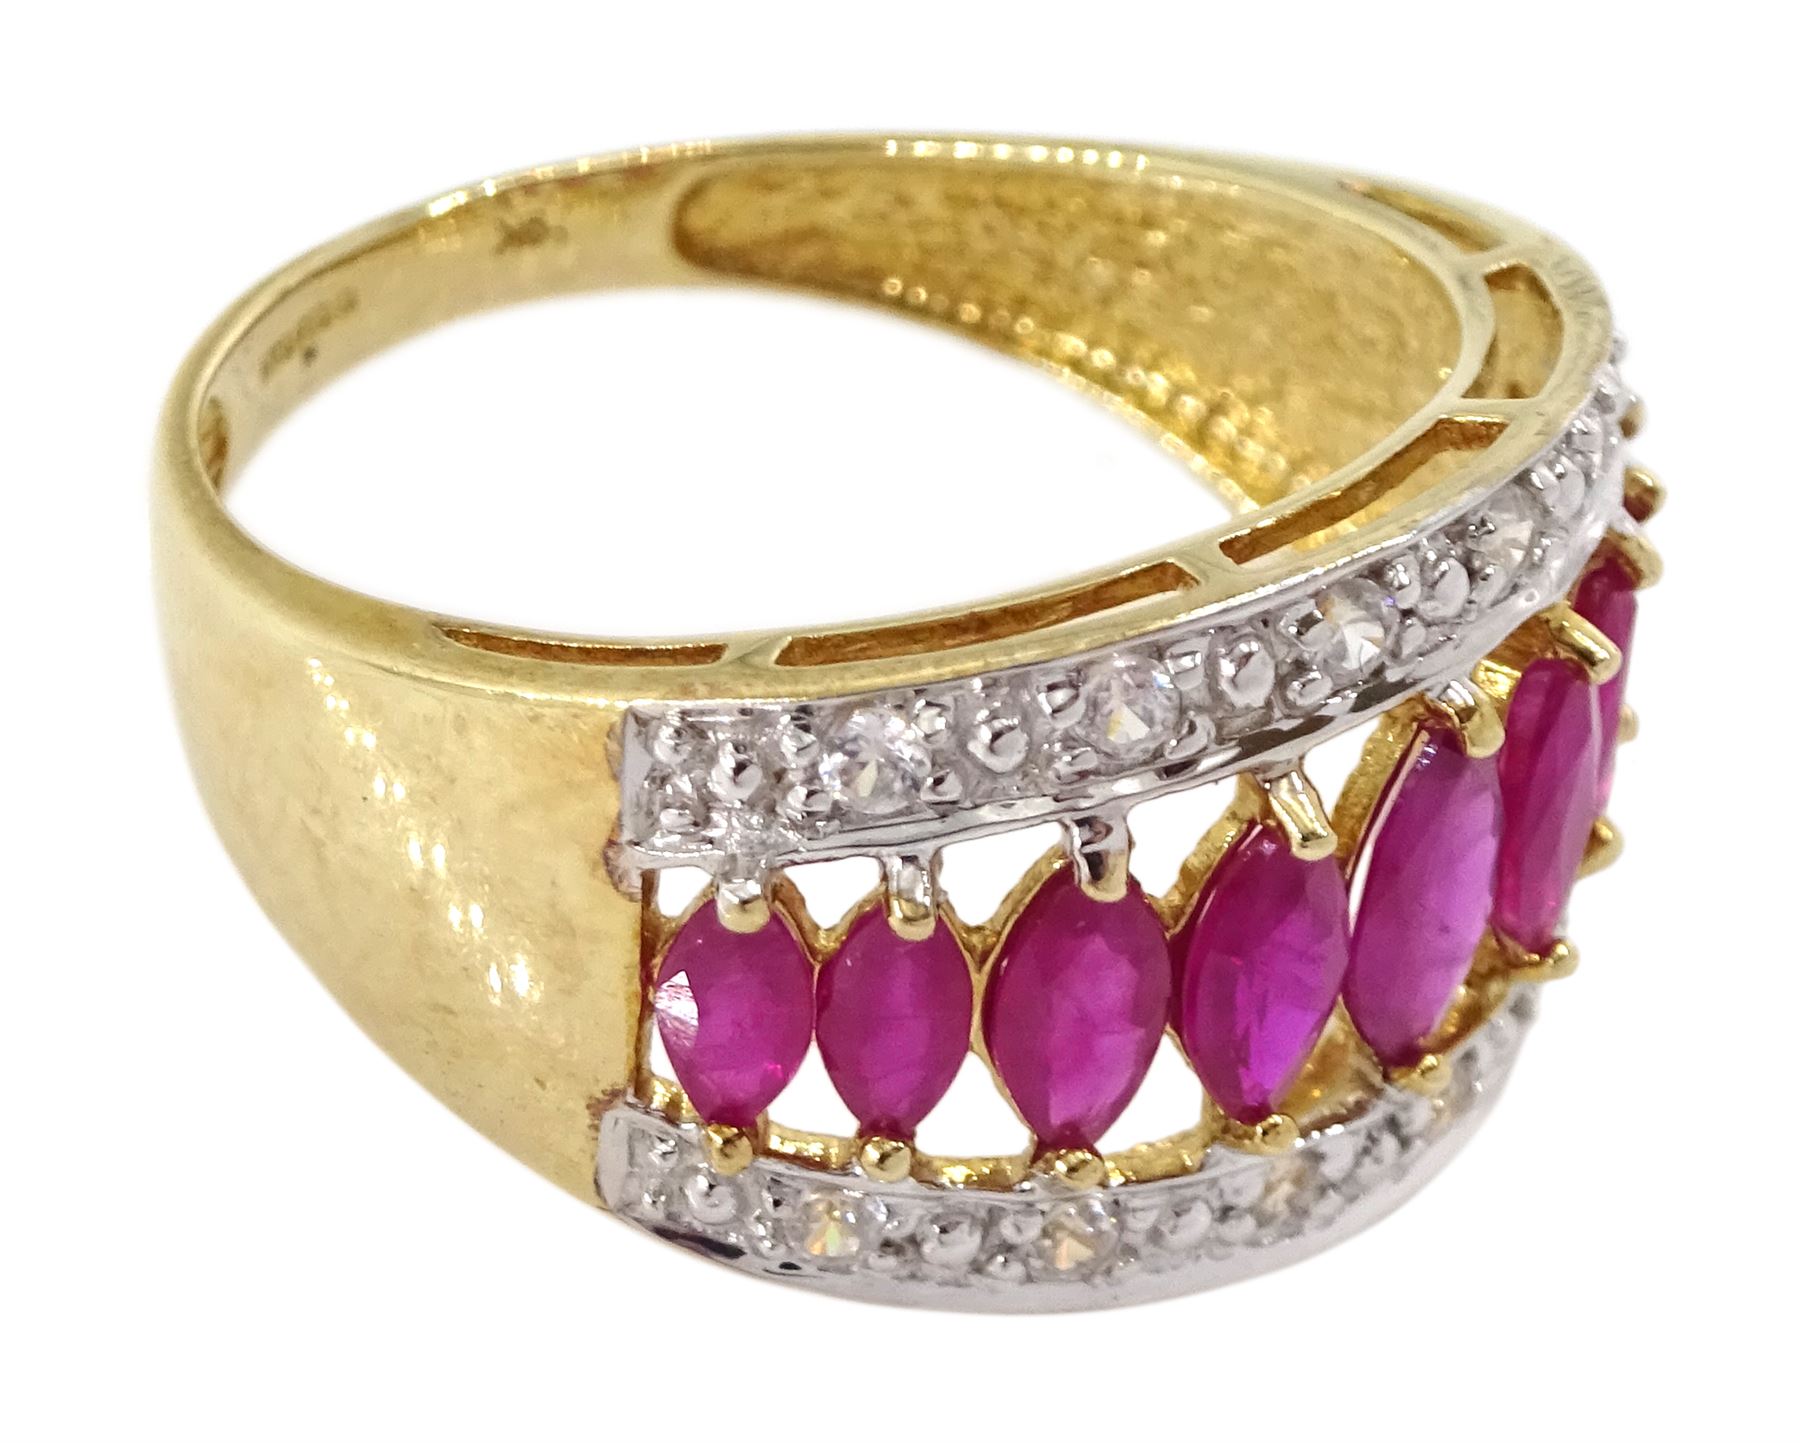 9ct gold marquise shaped ruby and diamond ring - Image 3 of 4